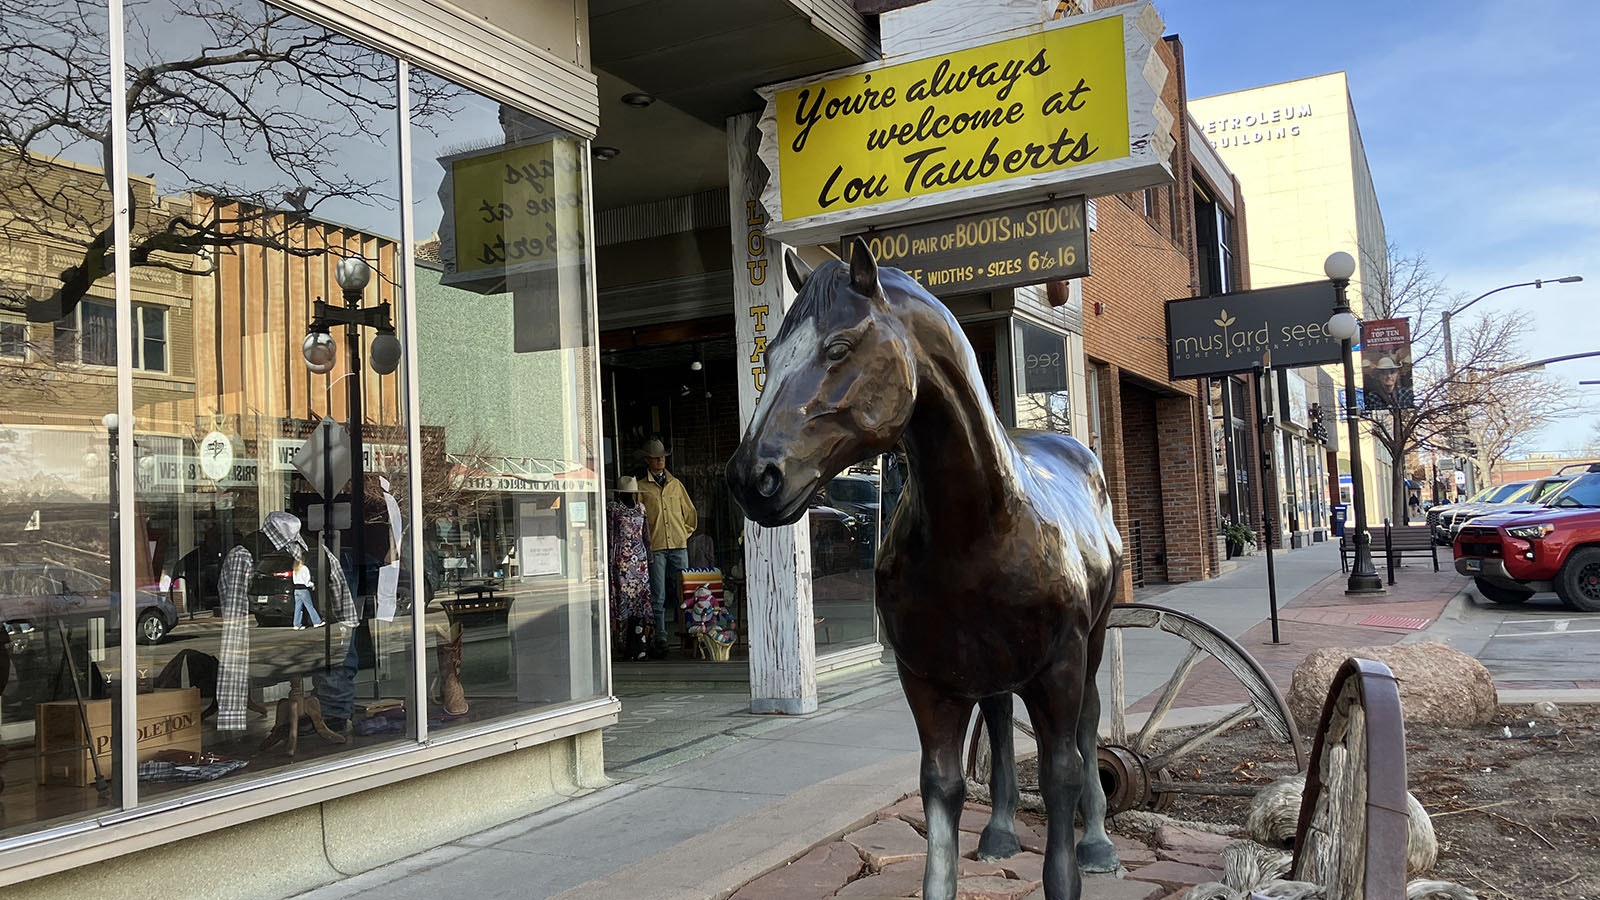 A horse on the sidewalk in downtown Casper, signals the specialty western items that customers will find inside including cowboy hats, jeans, boots, saddles, tack, and much more.